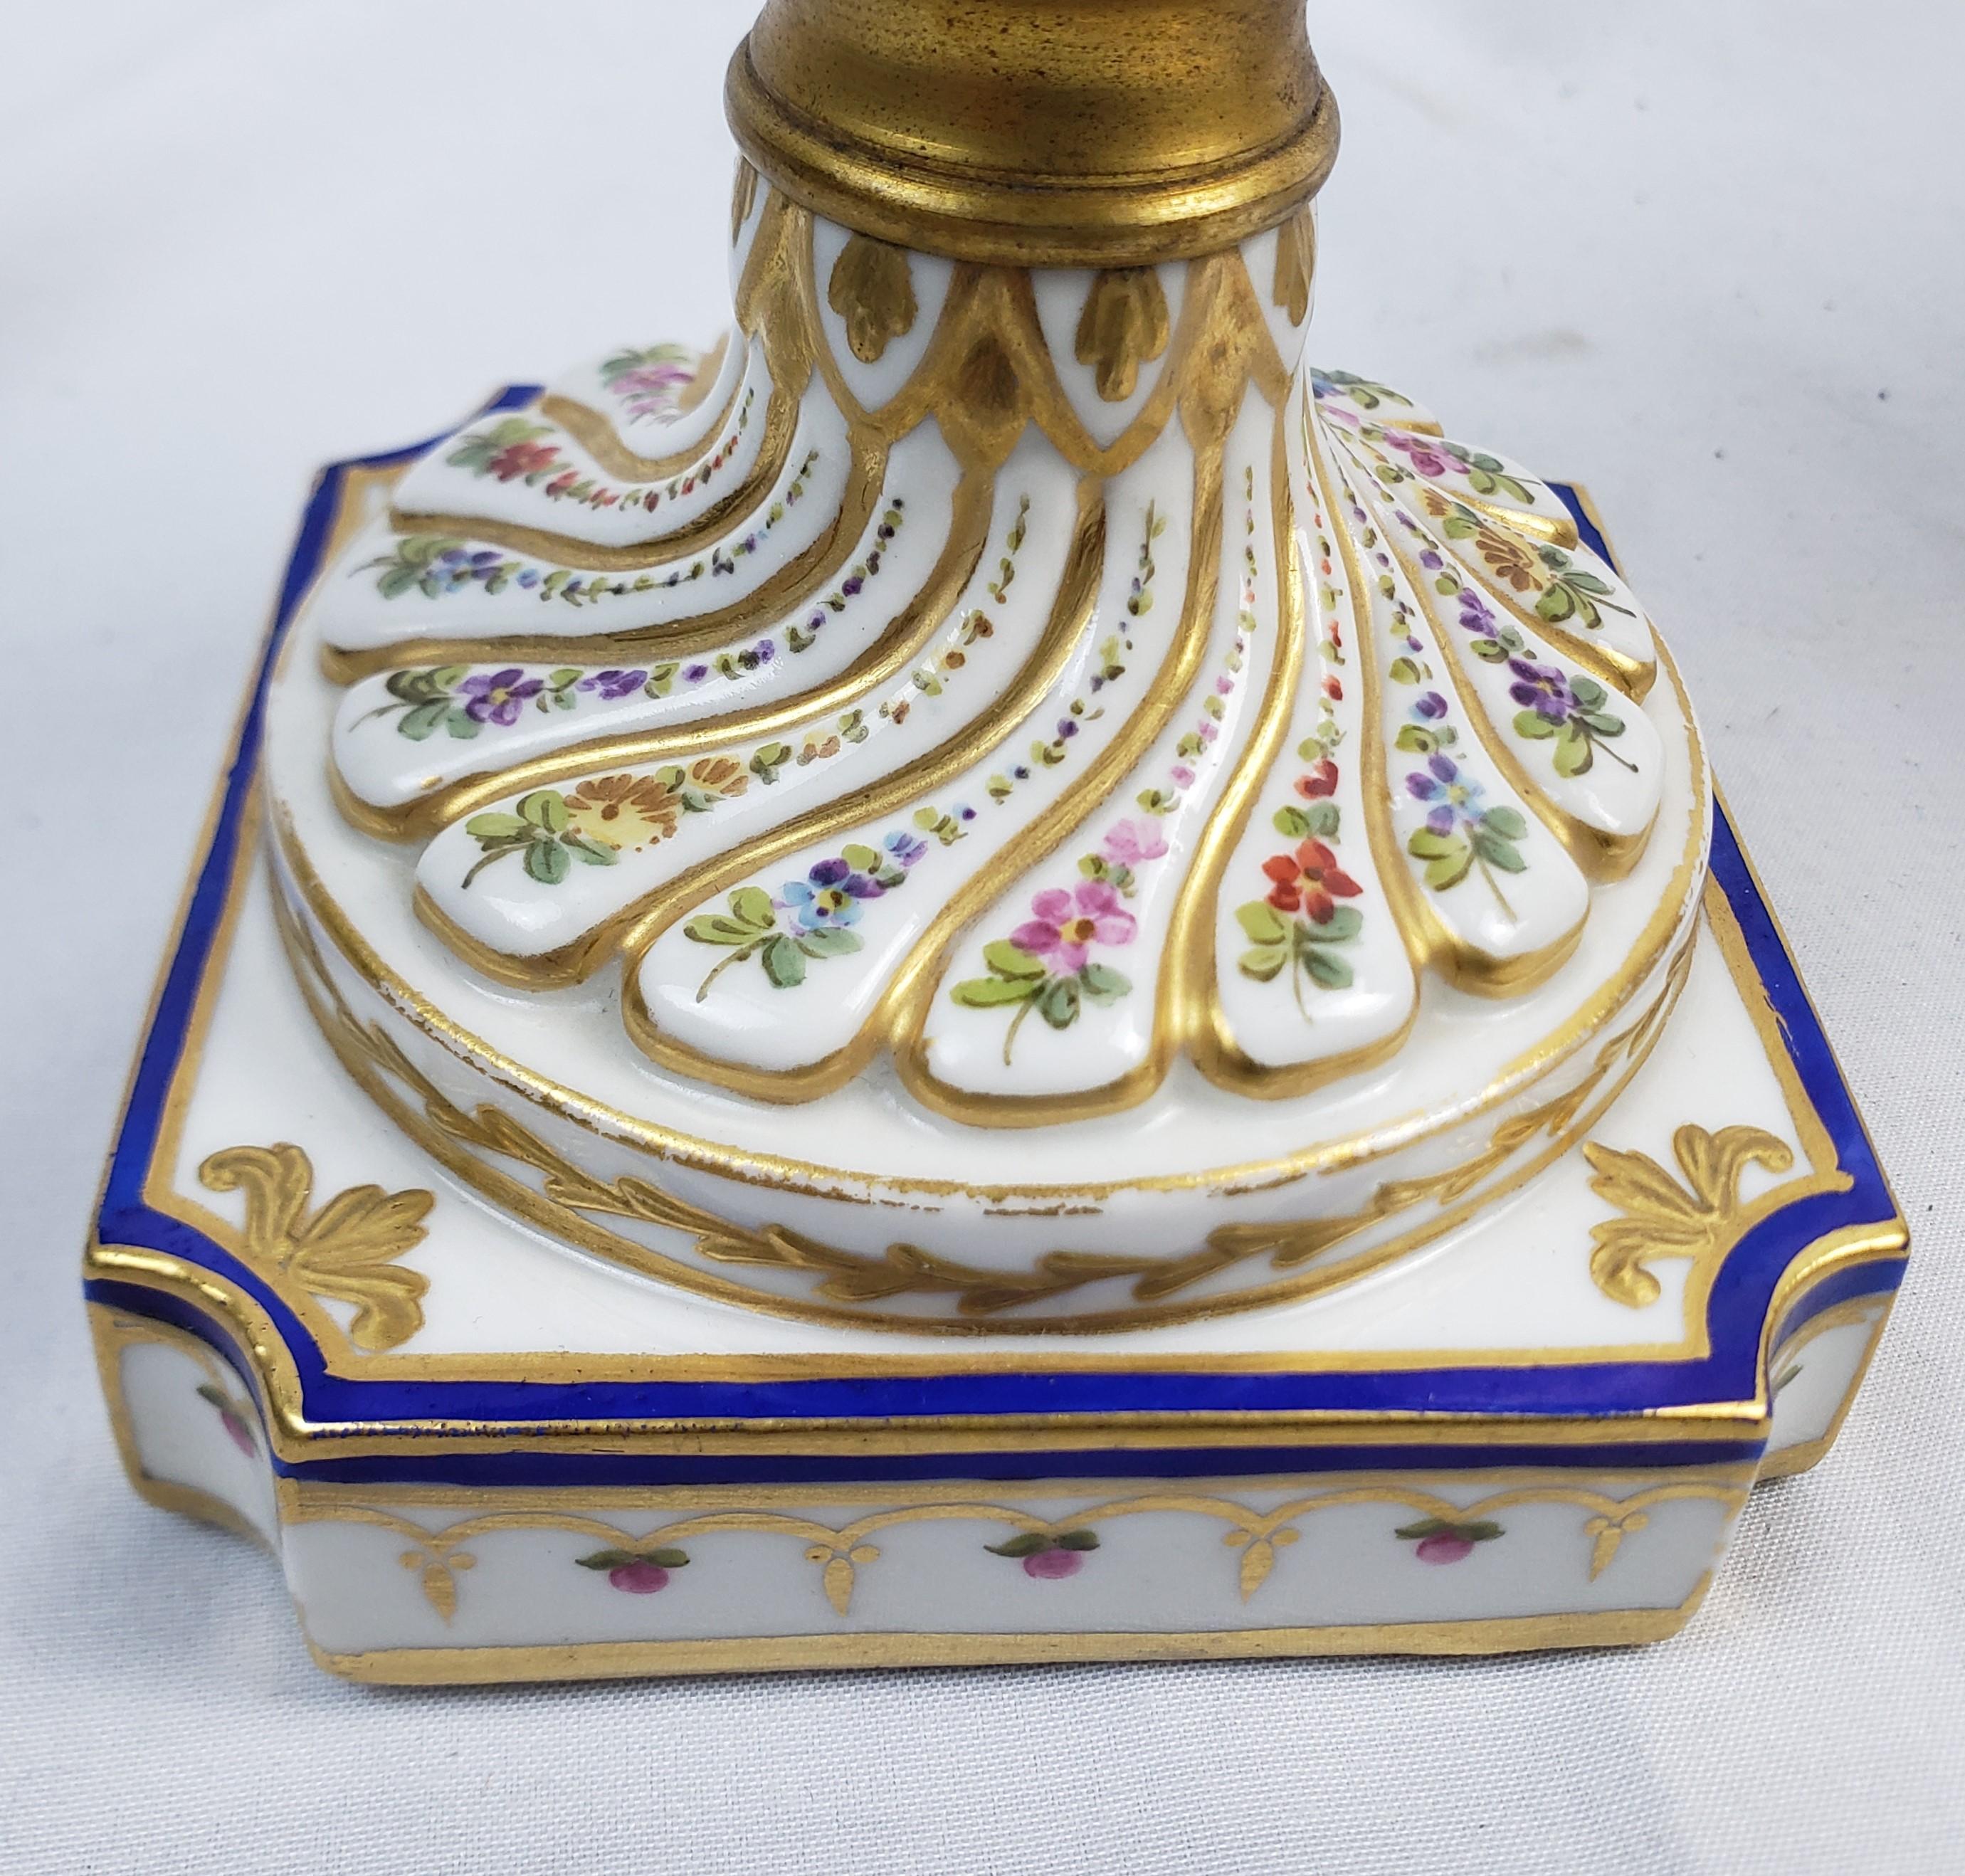 Pair of Antique Sevres Styled Covered Urns with Ornate Hand-Painted Decoration For Sale 9